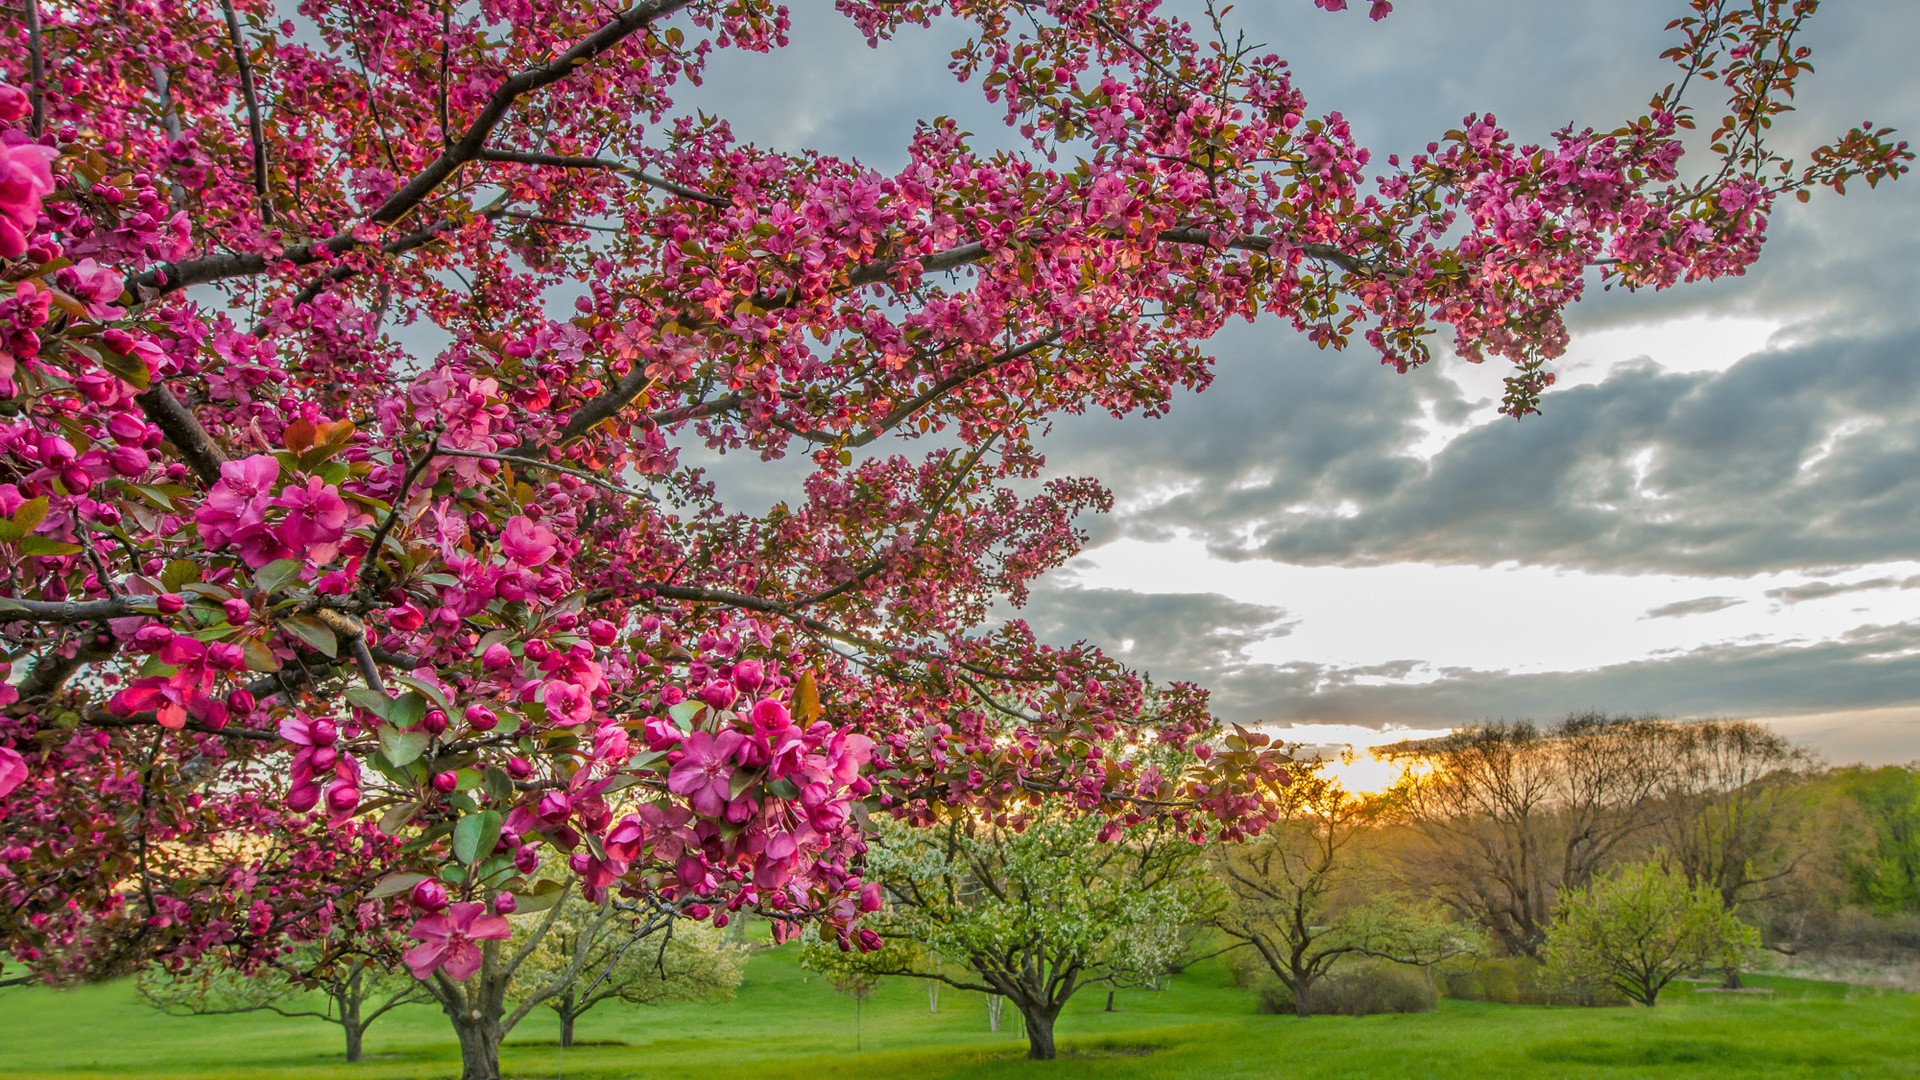 Flowering trees in orchard wallpapers and images - wallpapers, pictures